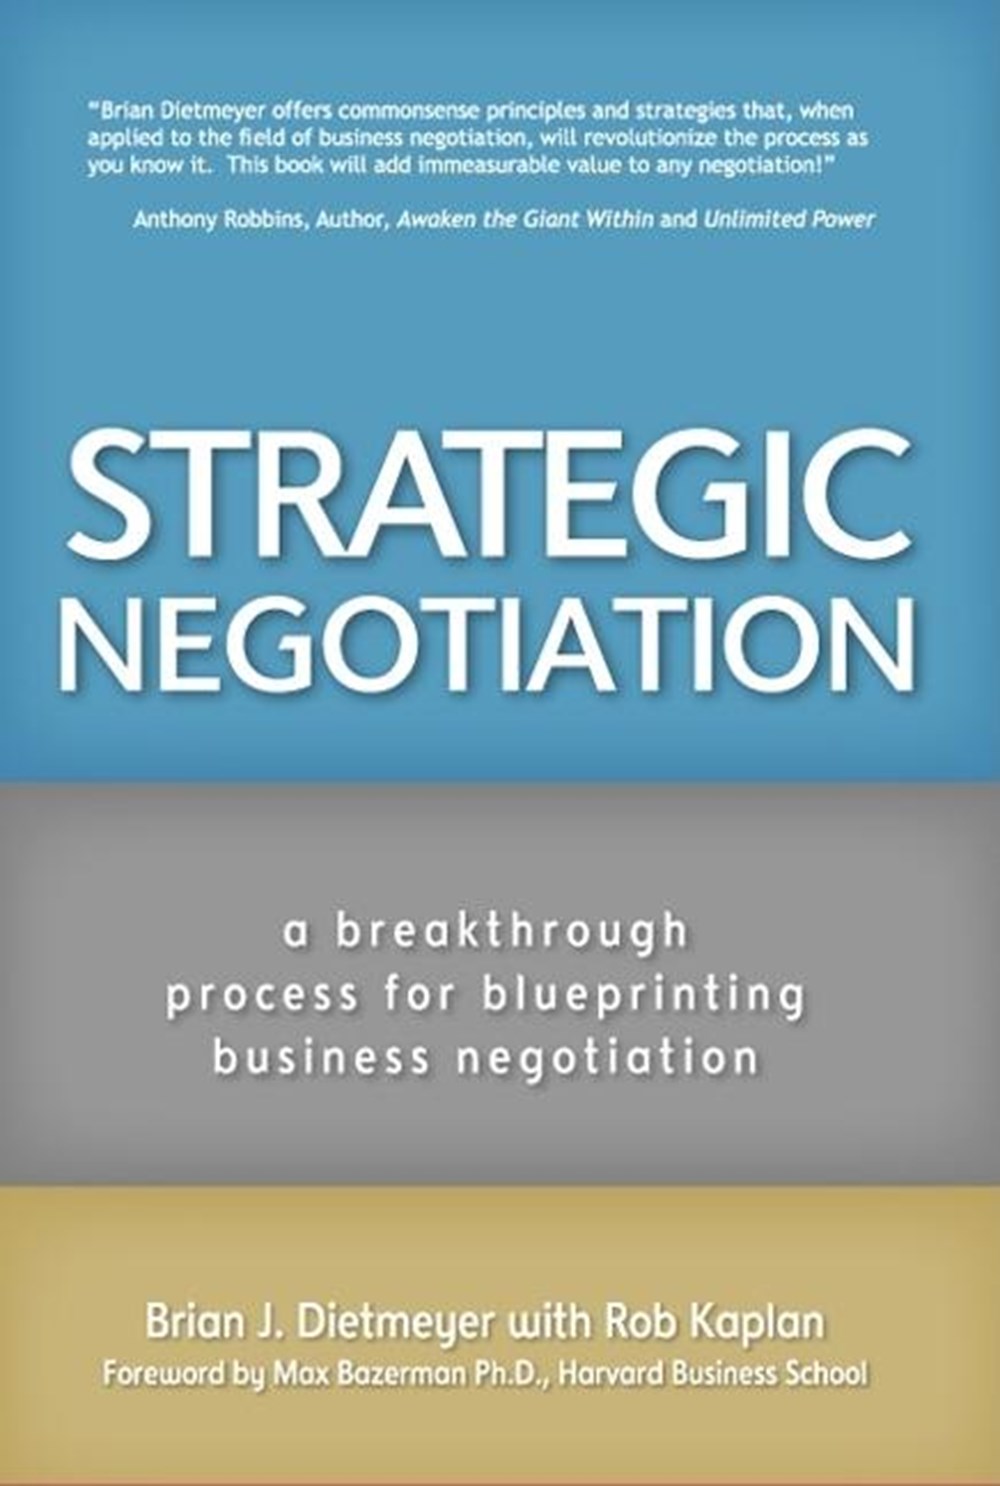 Strategic Negotiation: A Breakthrough 4-Step Process for Effective Business Negotiation